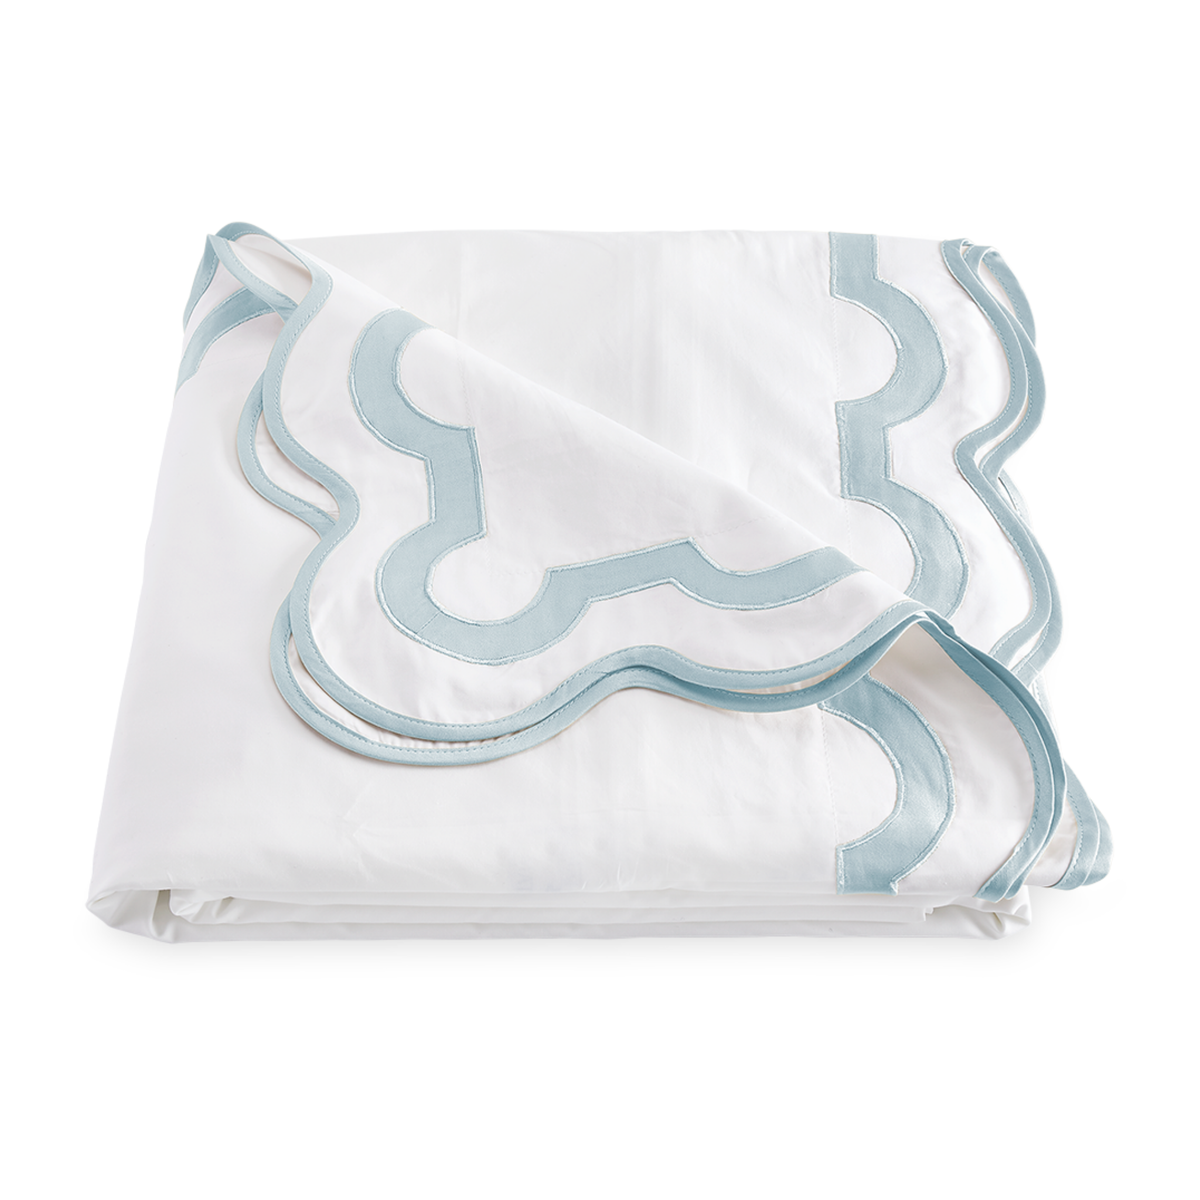 Folded Duvet Cover of Matouk Mirasol Collection in Pool Color